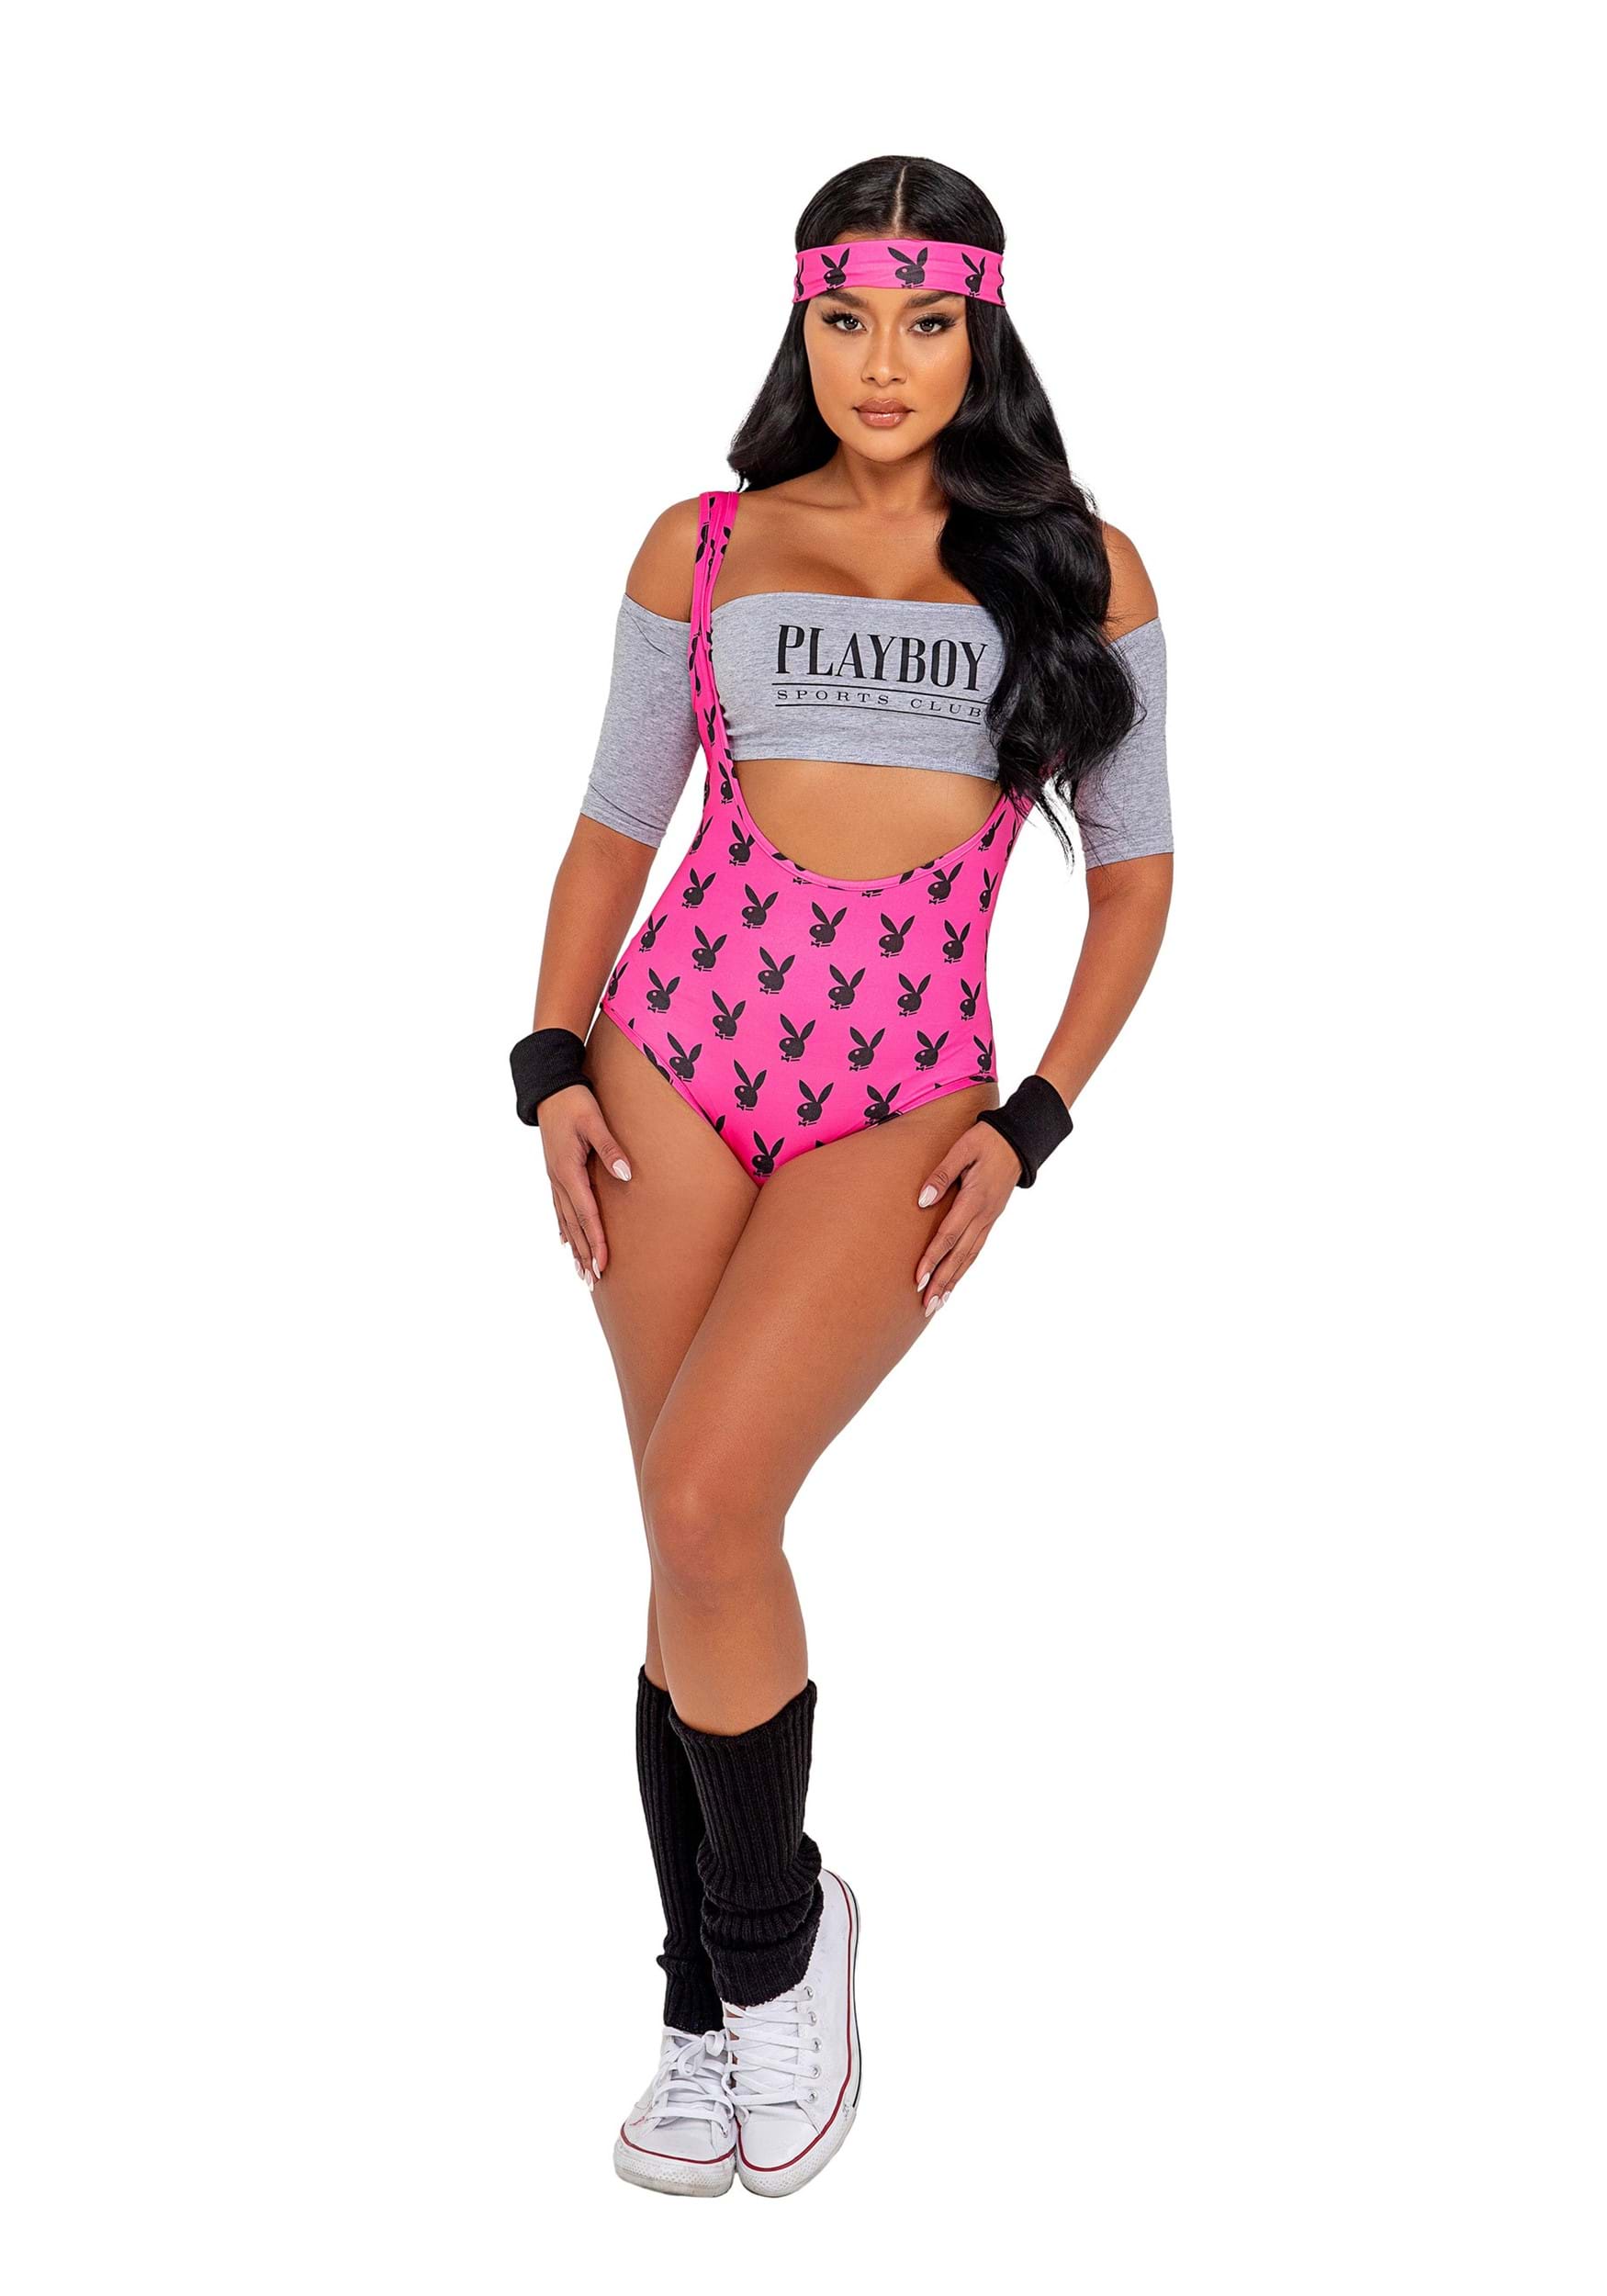 Playboy Retro Physical Fancy Dress Costume For Women